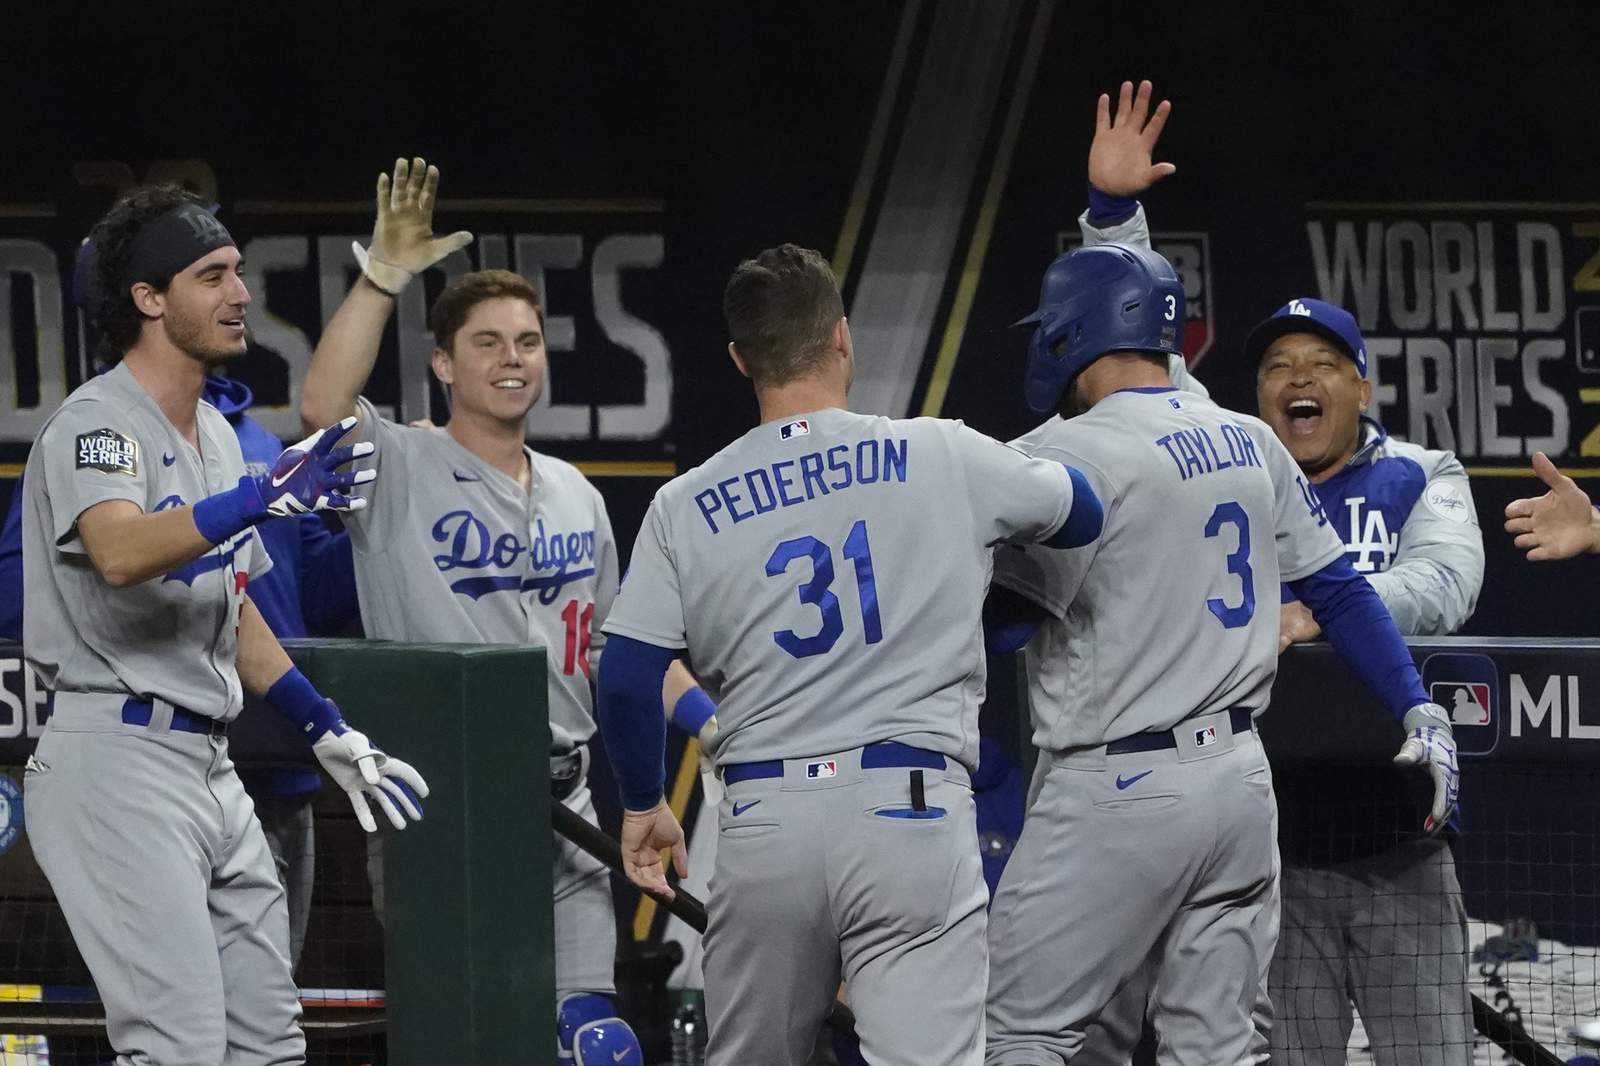 The Latest: Seager drives in go-ahead run, Dodgers up 7-6